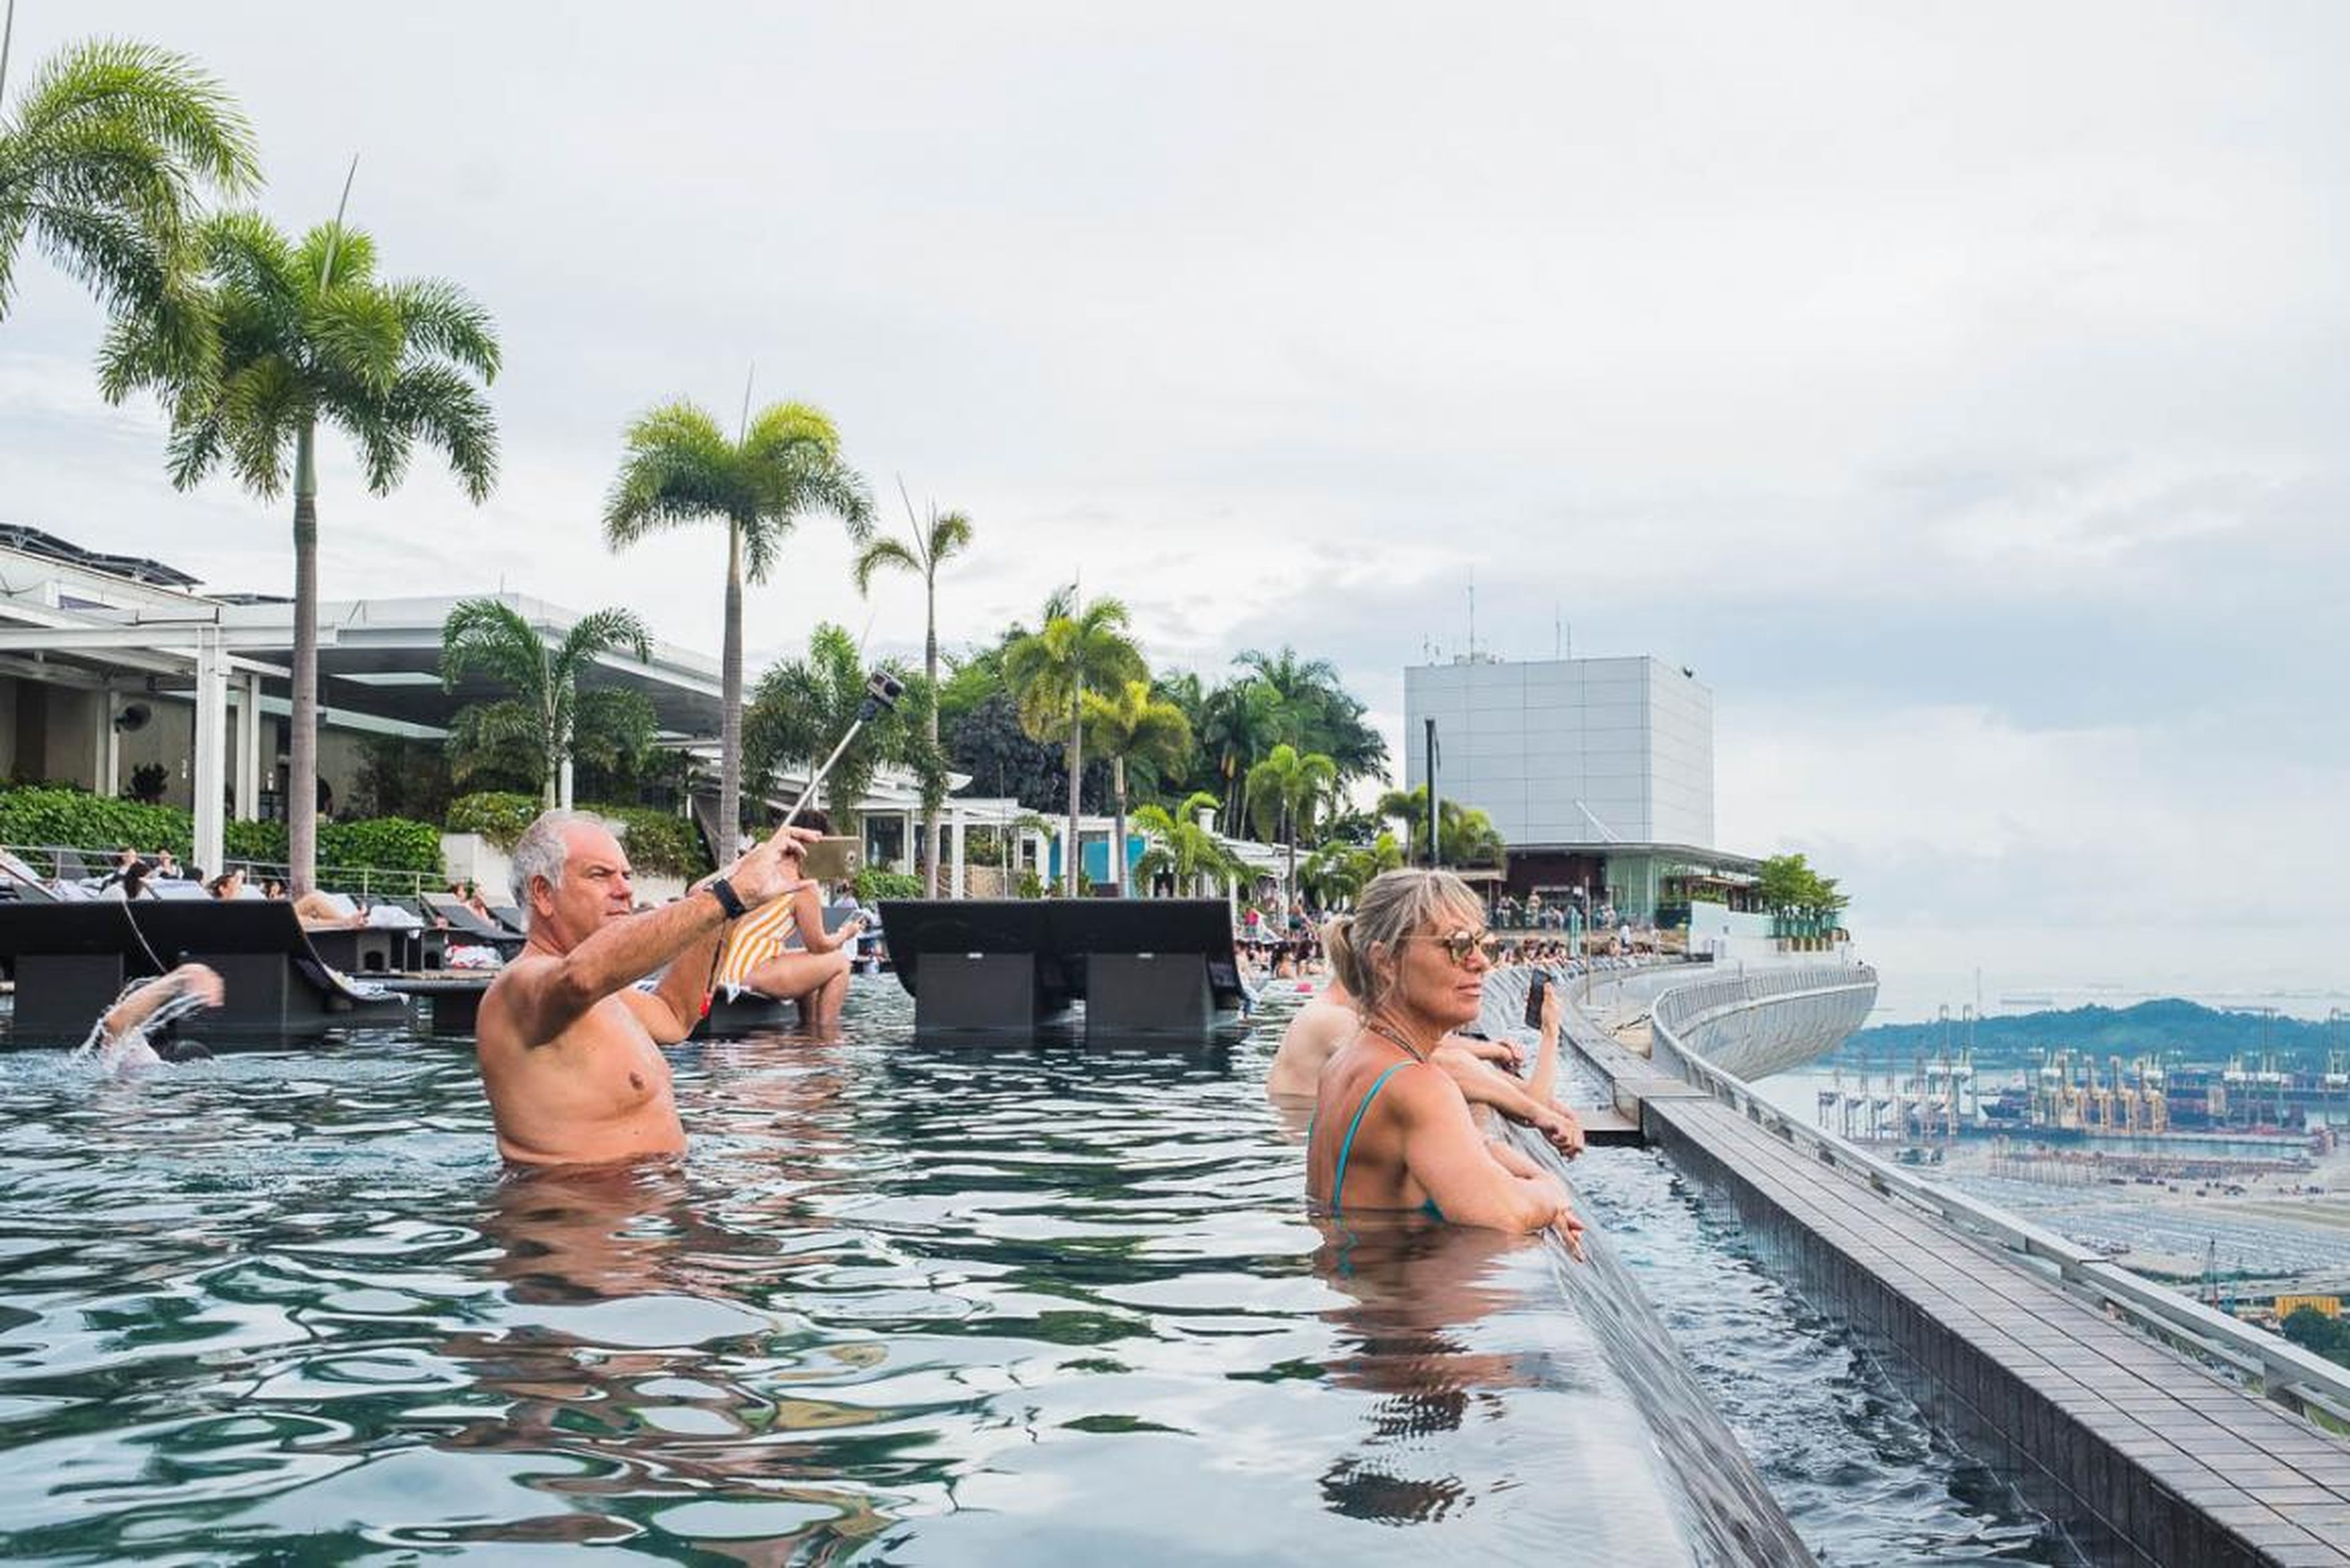 If you plan on getting that perfect Instagram photo in the world's largest rooftop infinity pool, beware: Everyone else is trying to do the same thing. It's exhausting.